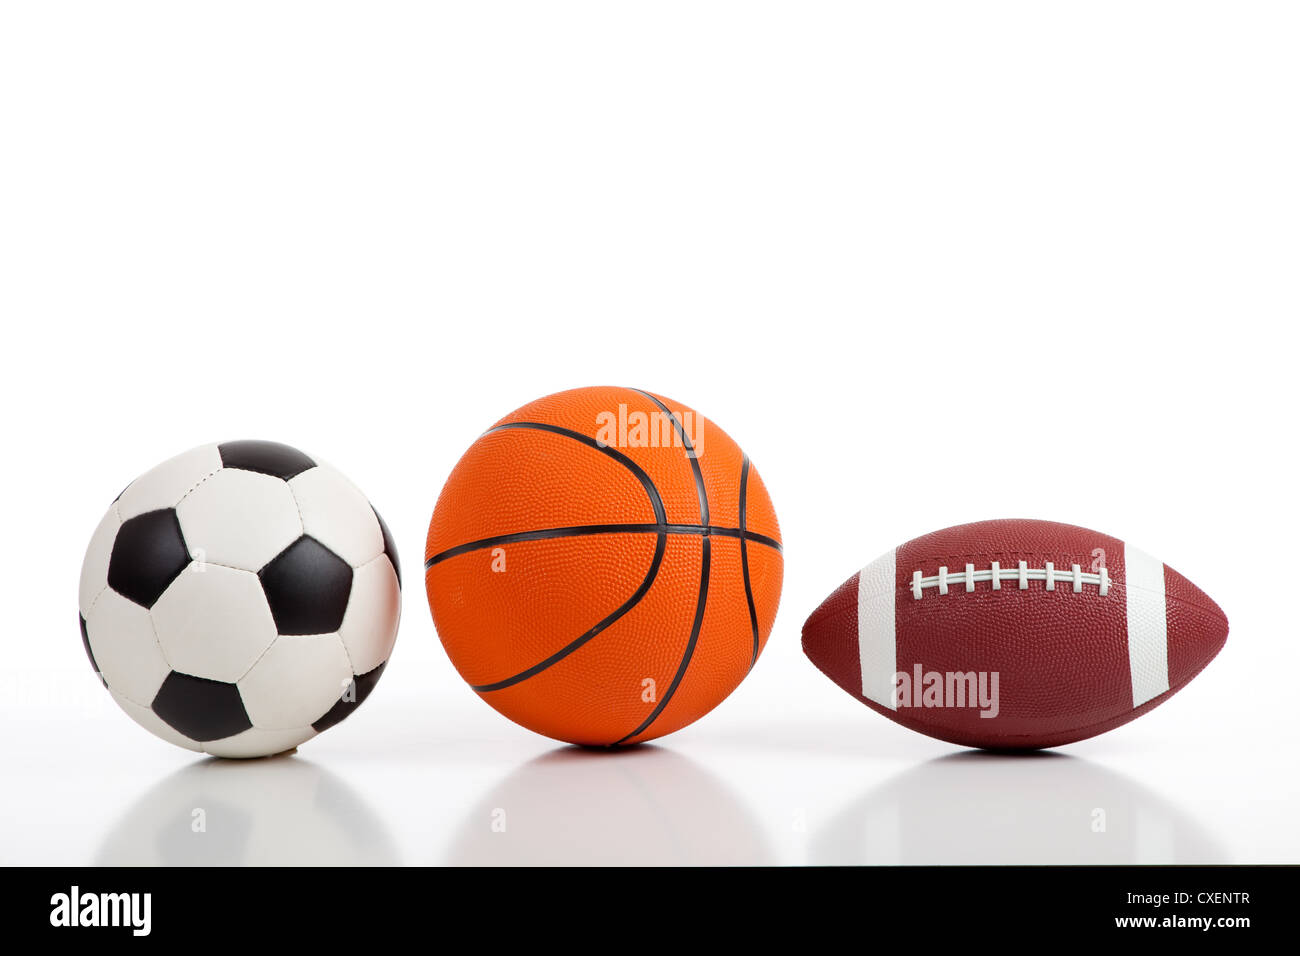 Assorted sports balls on a white background including a soccer ball, a basketball and an American football Stock Photo